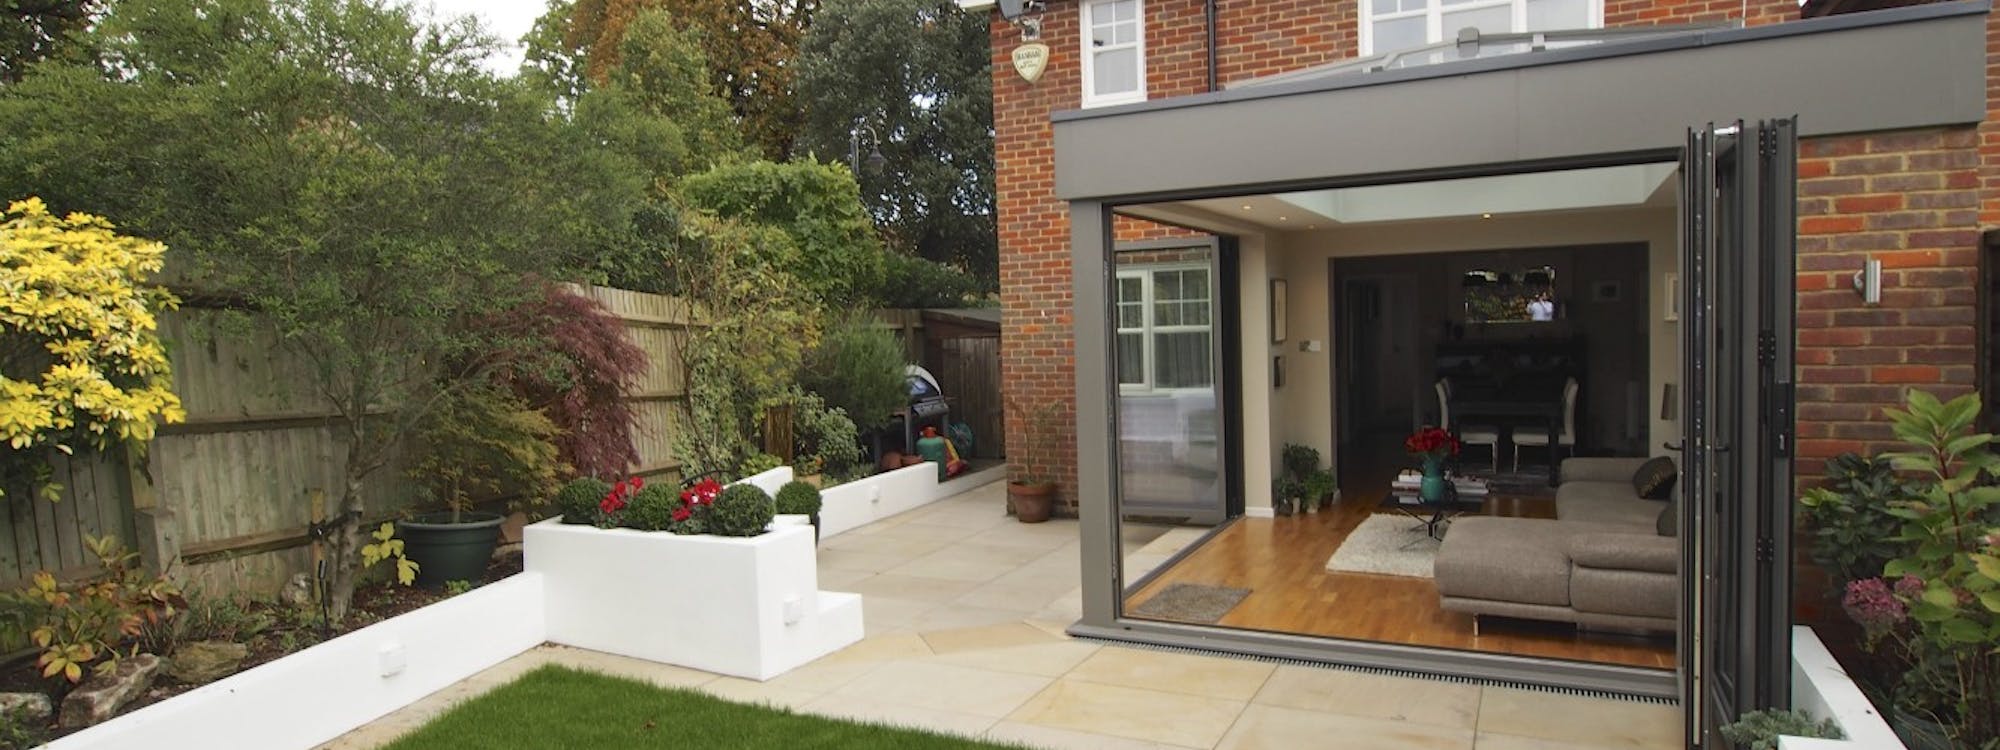 Home extensions - designed, project managed, built